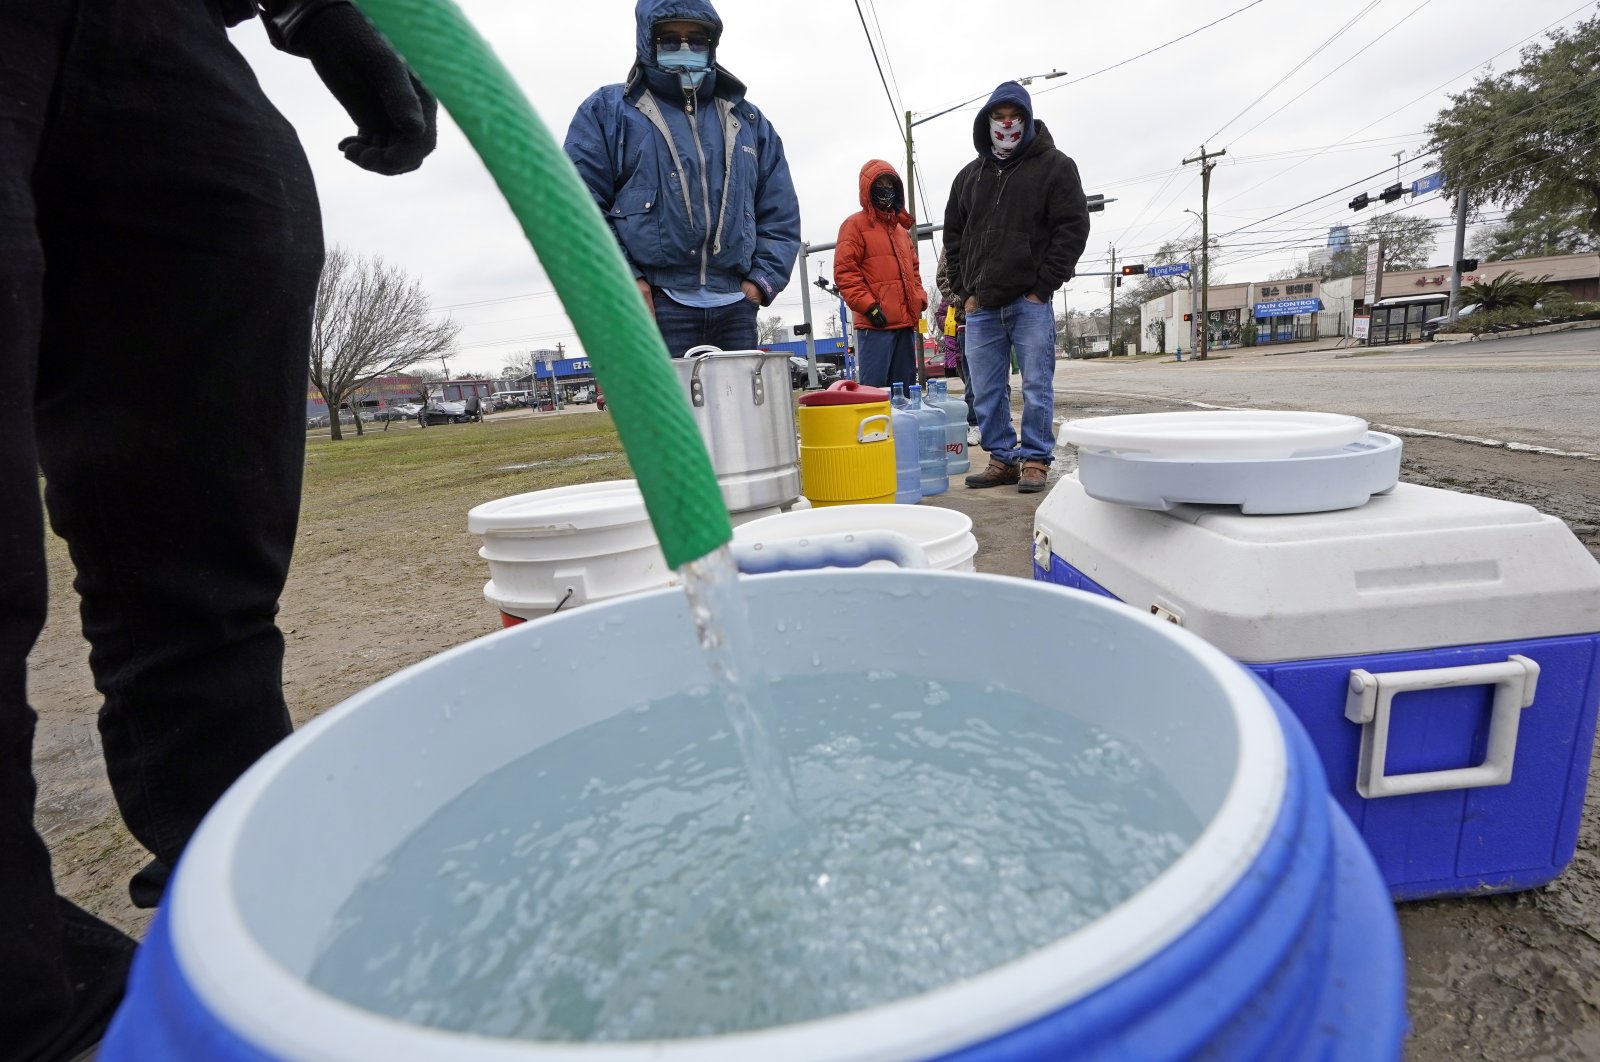 A water bucket is filled as others wait in near-freezing temperatures to use a hose from a public park spigot in Houston, Texas, U.S., Feb. 18, 2021. (AP Photo)